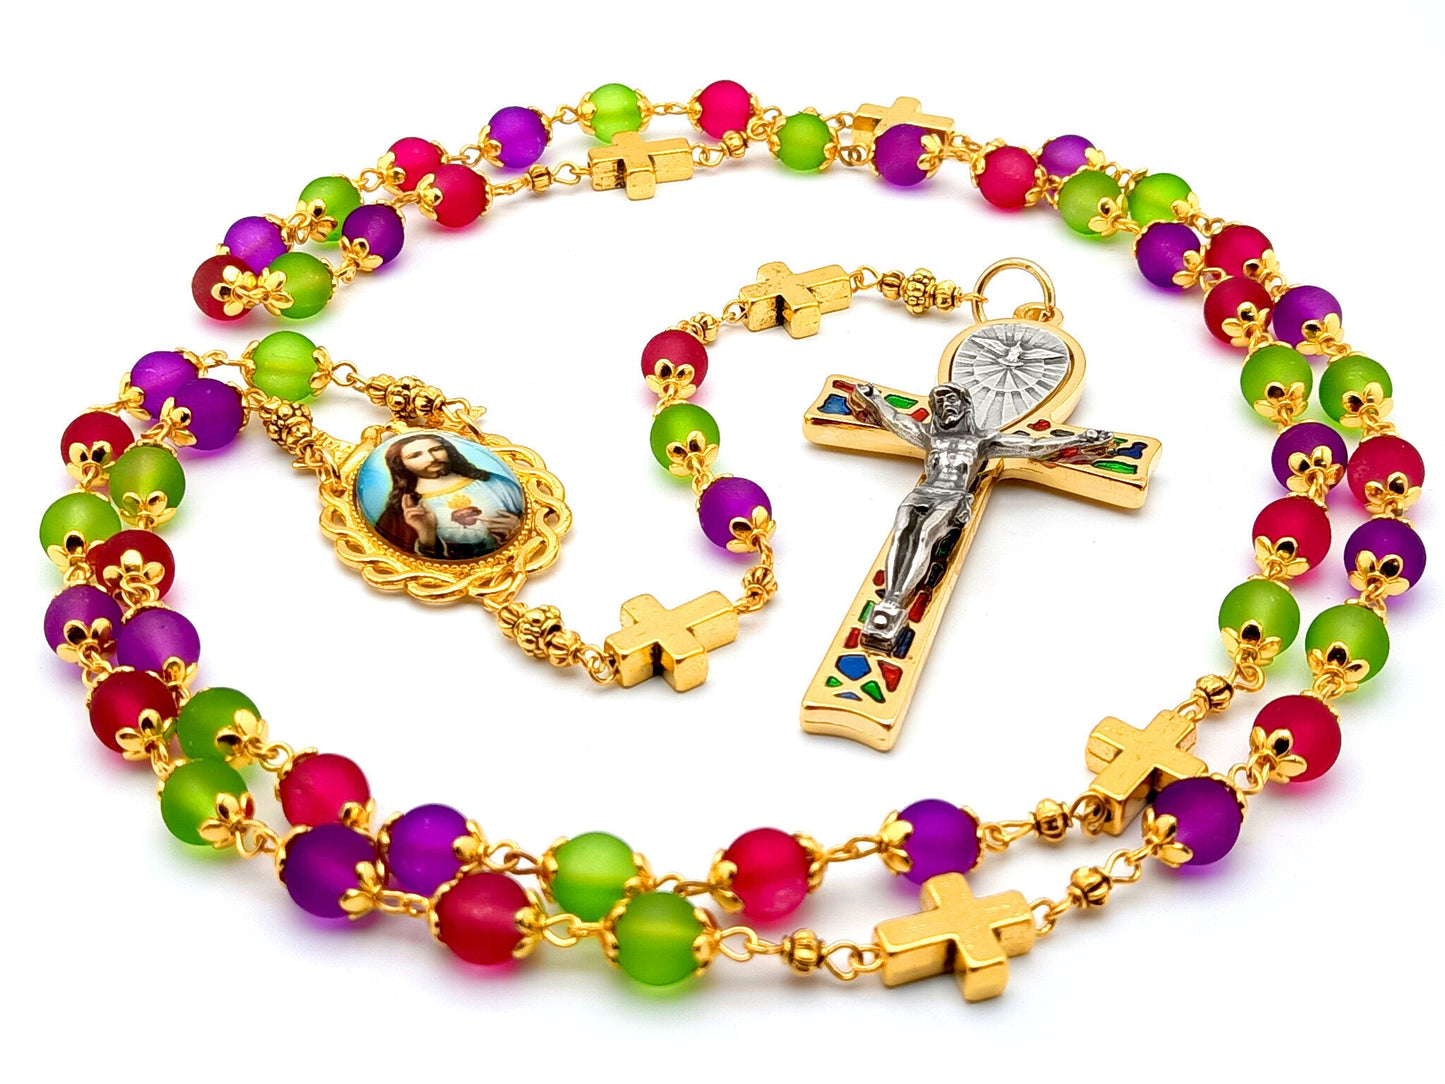 Sacred Heart unique rosary beads with multi coloured glass beads, Holy Spirit crucifix, golden accessories and picture centre medal.